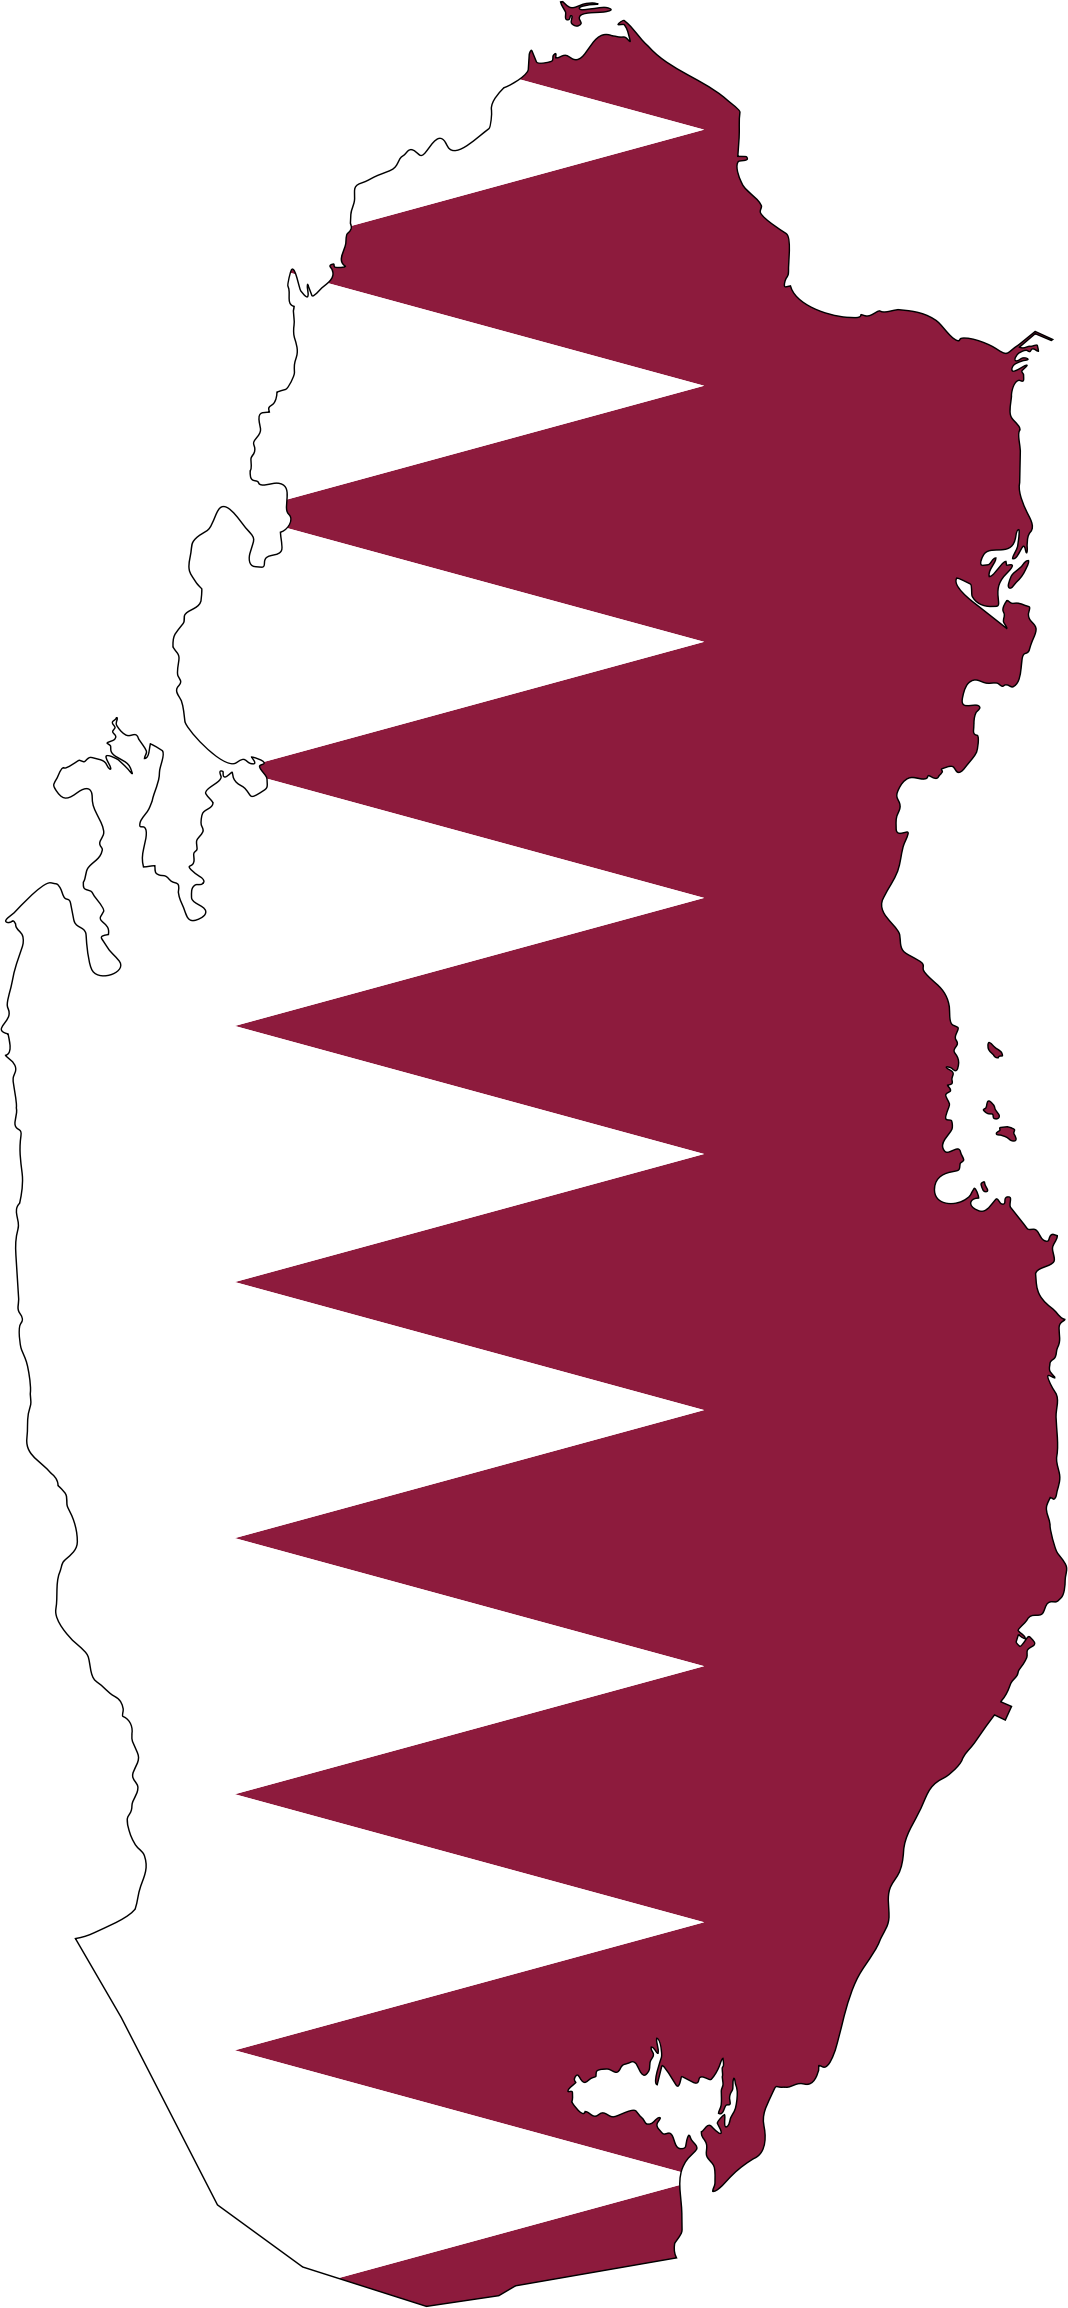 A Flag Of Qatar With A Black Background